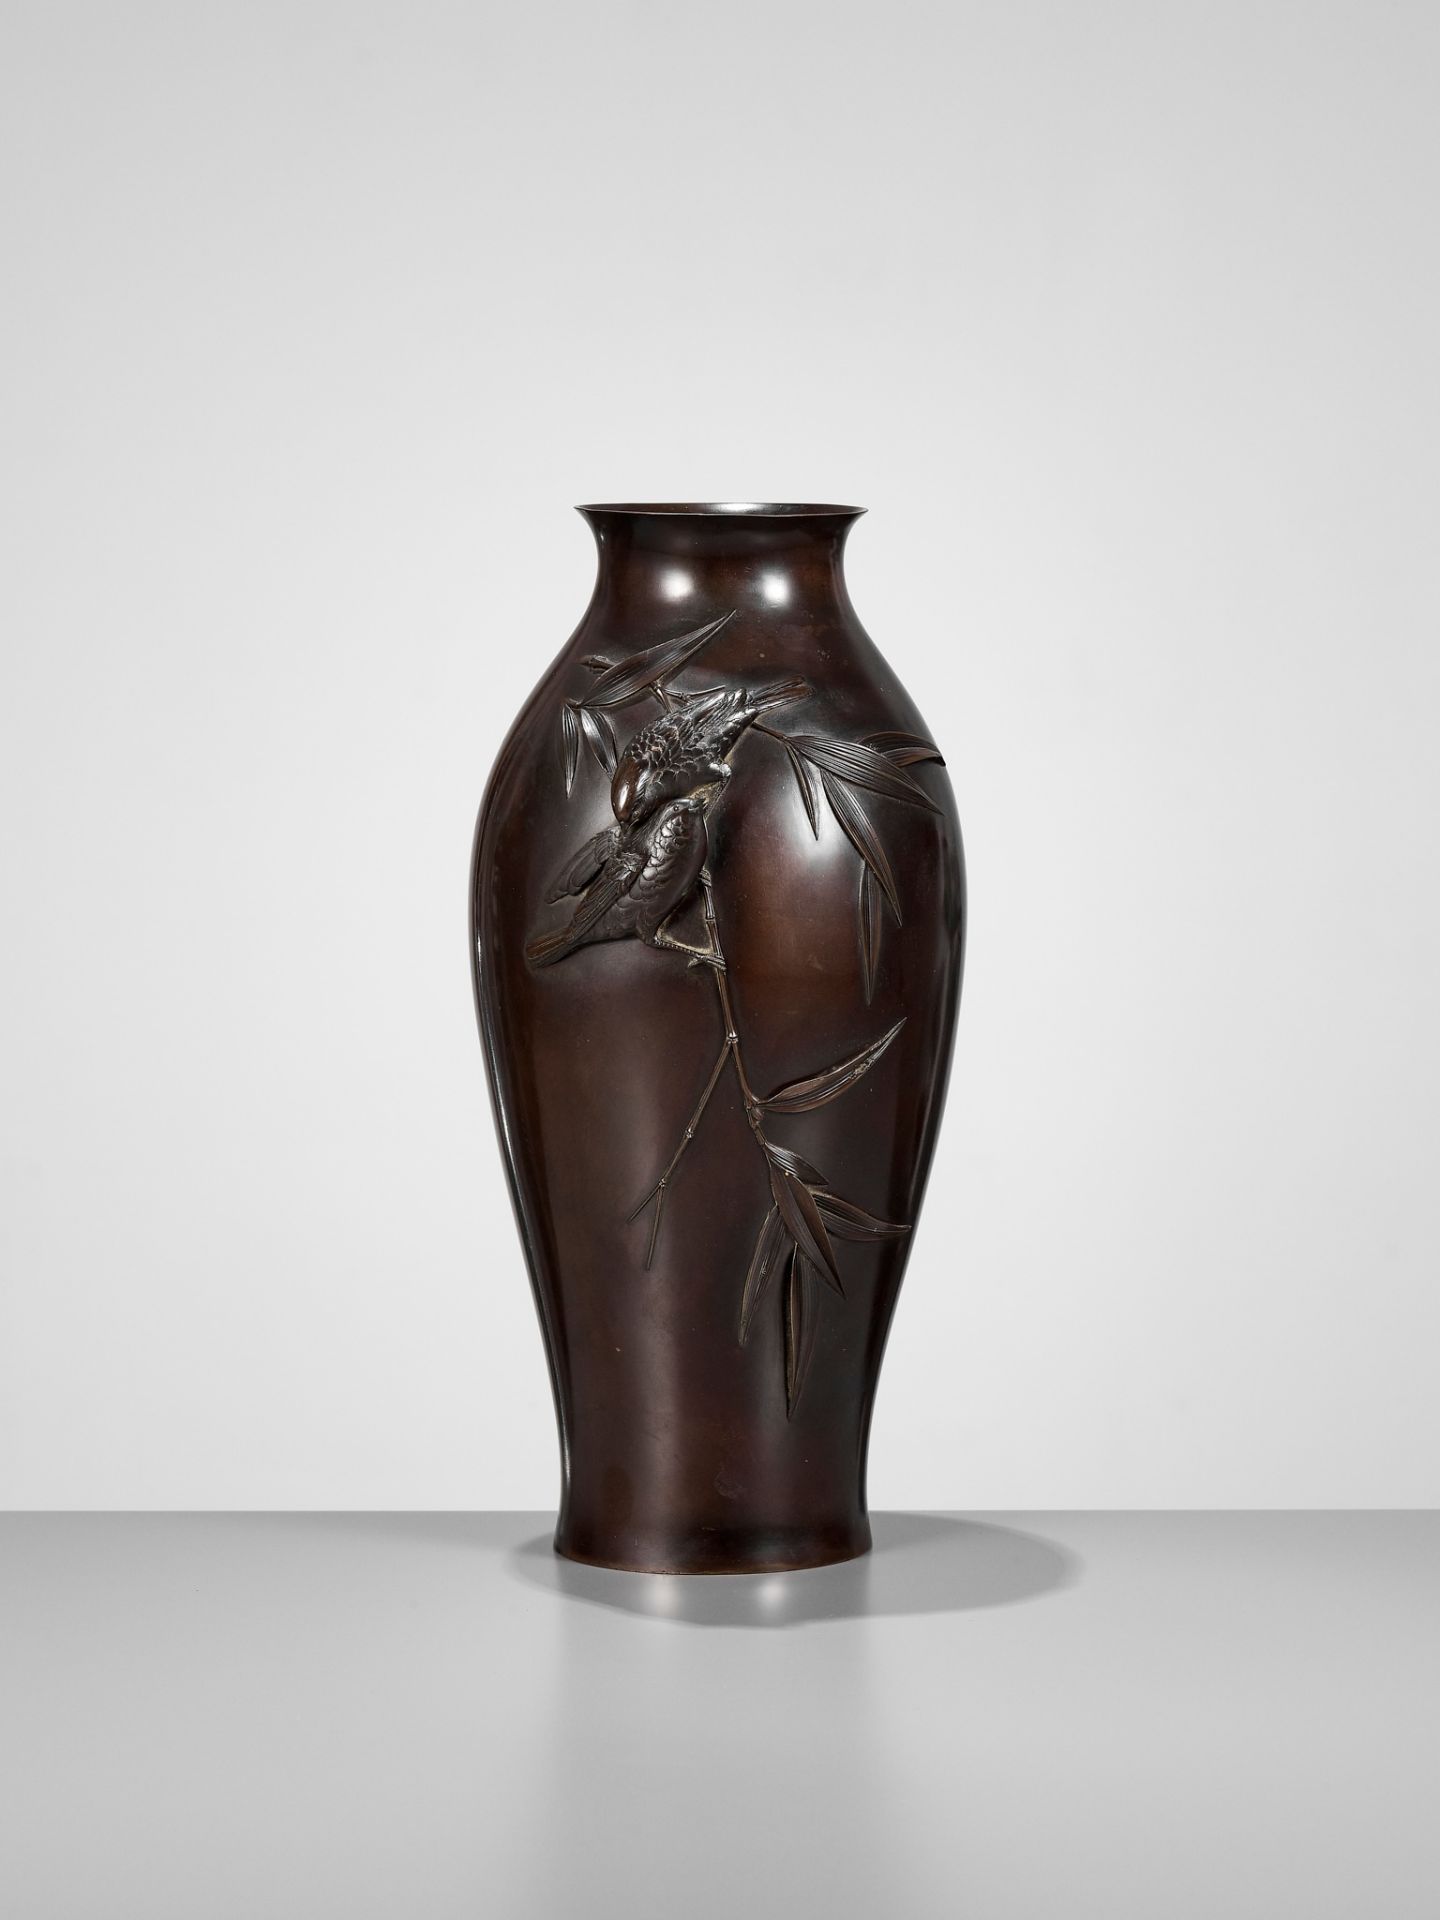 A FINE BRONZE VASE DEPICTING SPARROWS AND BAMBOO - Image 2 of 10